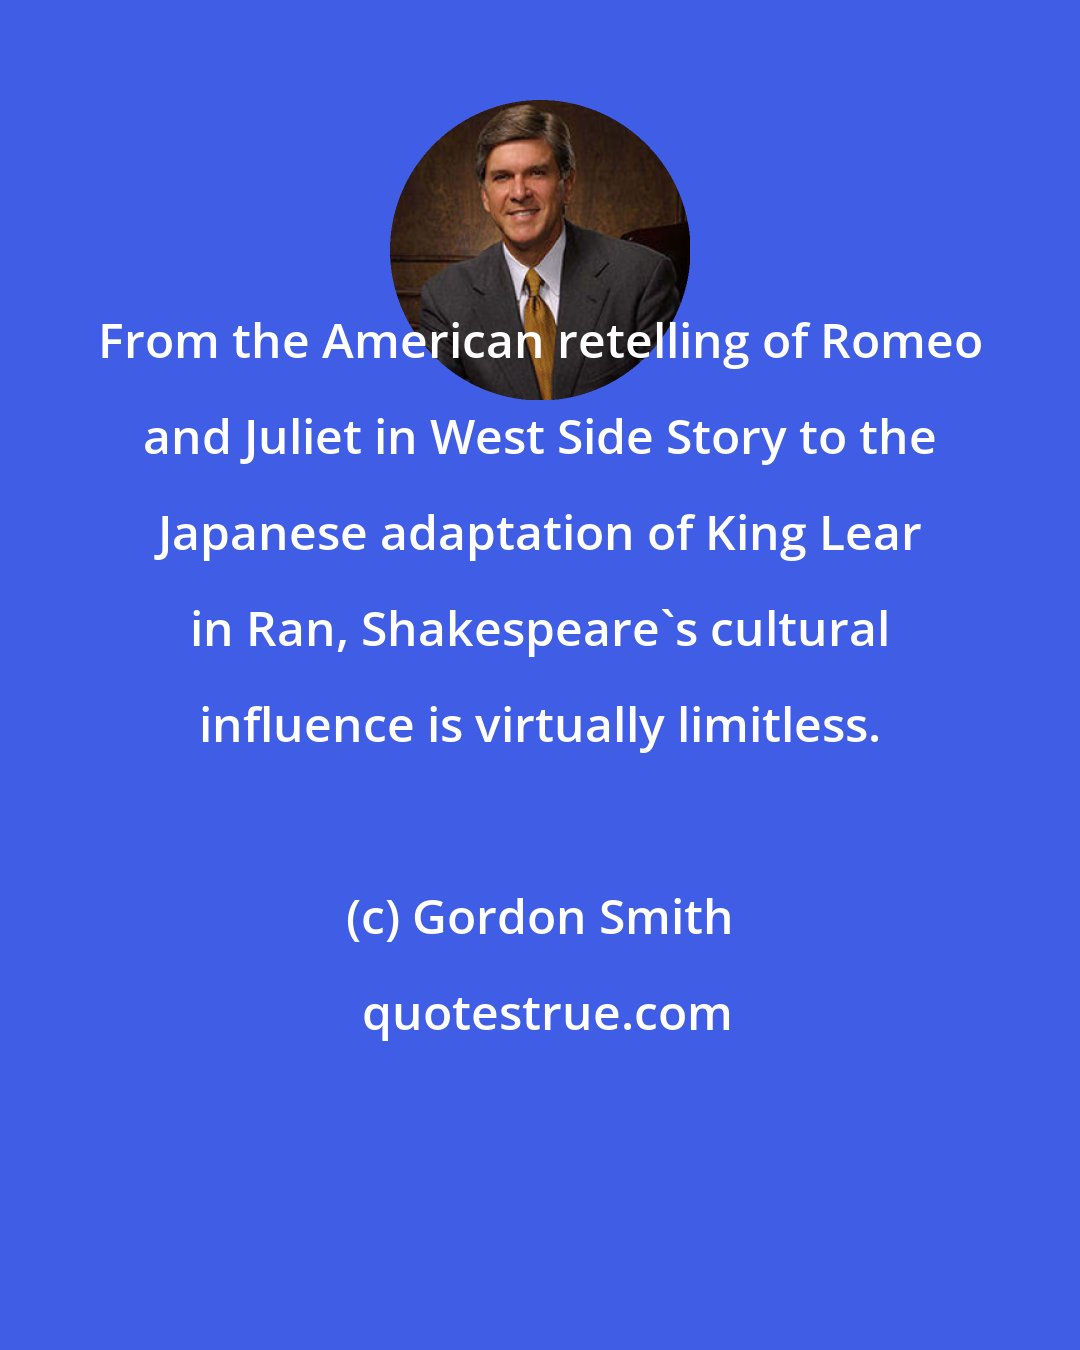 Gordon Smith: From the American retelling of Romeo and Juliet in West Side Story to the Japanese adaptation of King Lear in Ran, Shakespeare's cultural influence is virtually limitless.